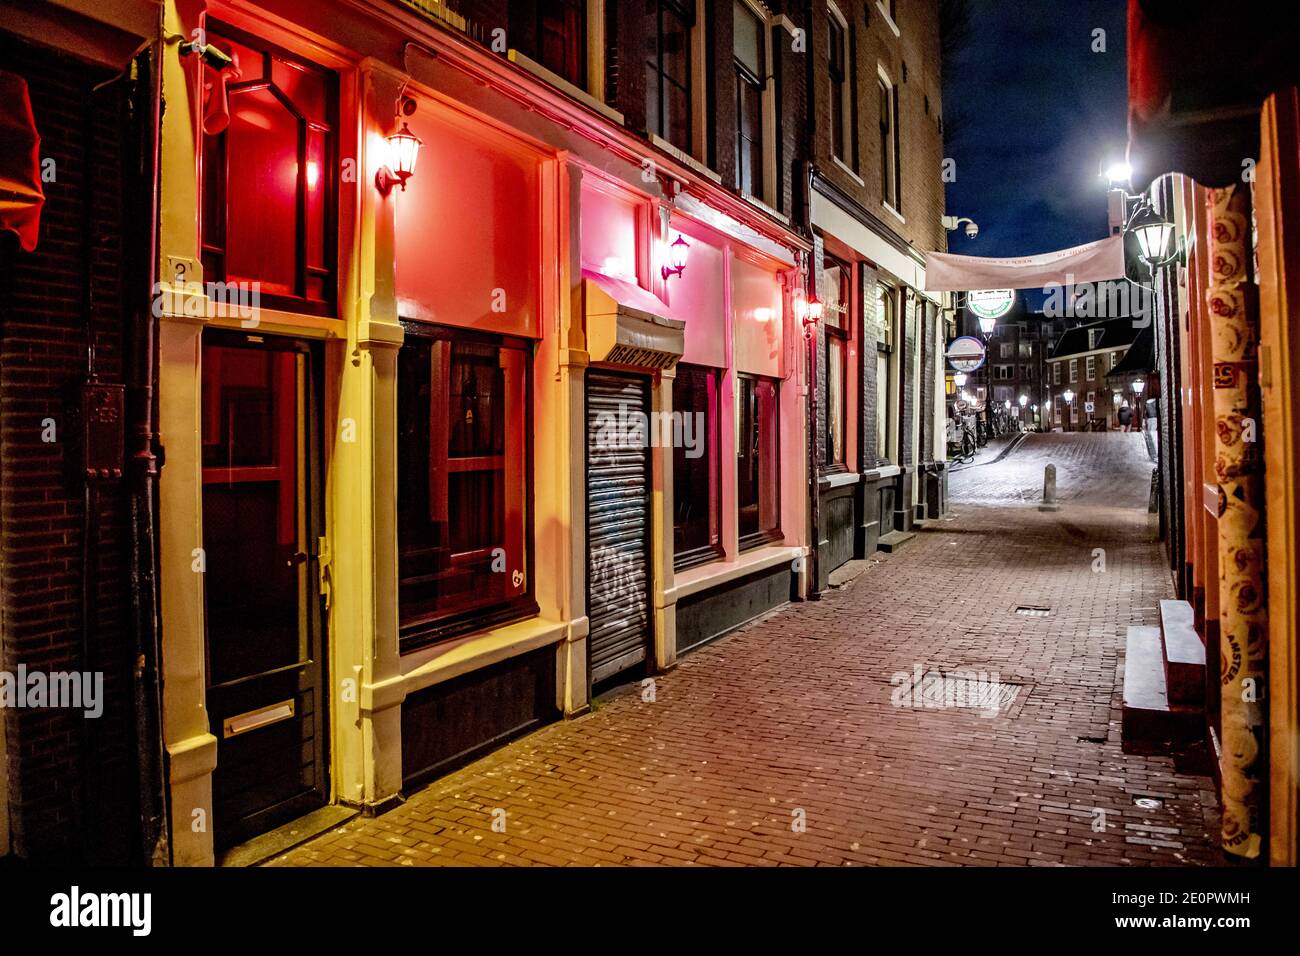 Manchuriet Studerende Regnskab Amsterdam, Netherlands. 02nd Jan, 2021. Empty red light district in  Amsterdam, the Netherlands, on January 01, 2020, during the Covid-19  lockdown. The streets are quiet due to the new corona rules and